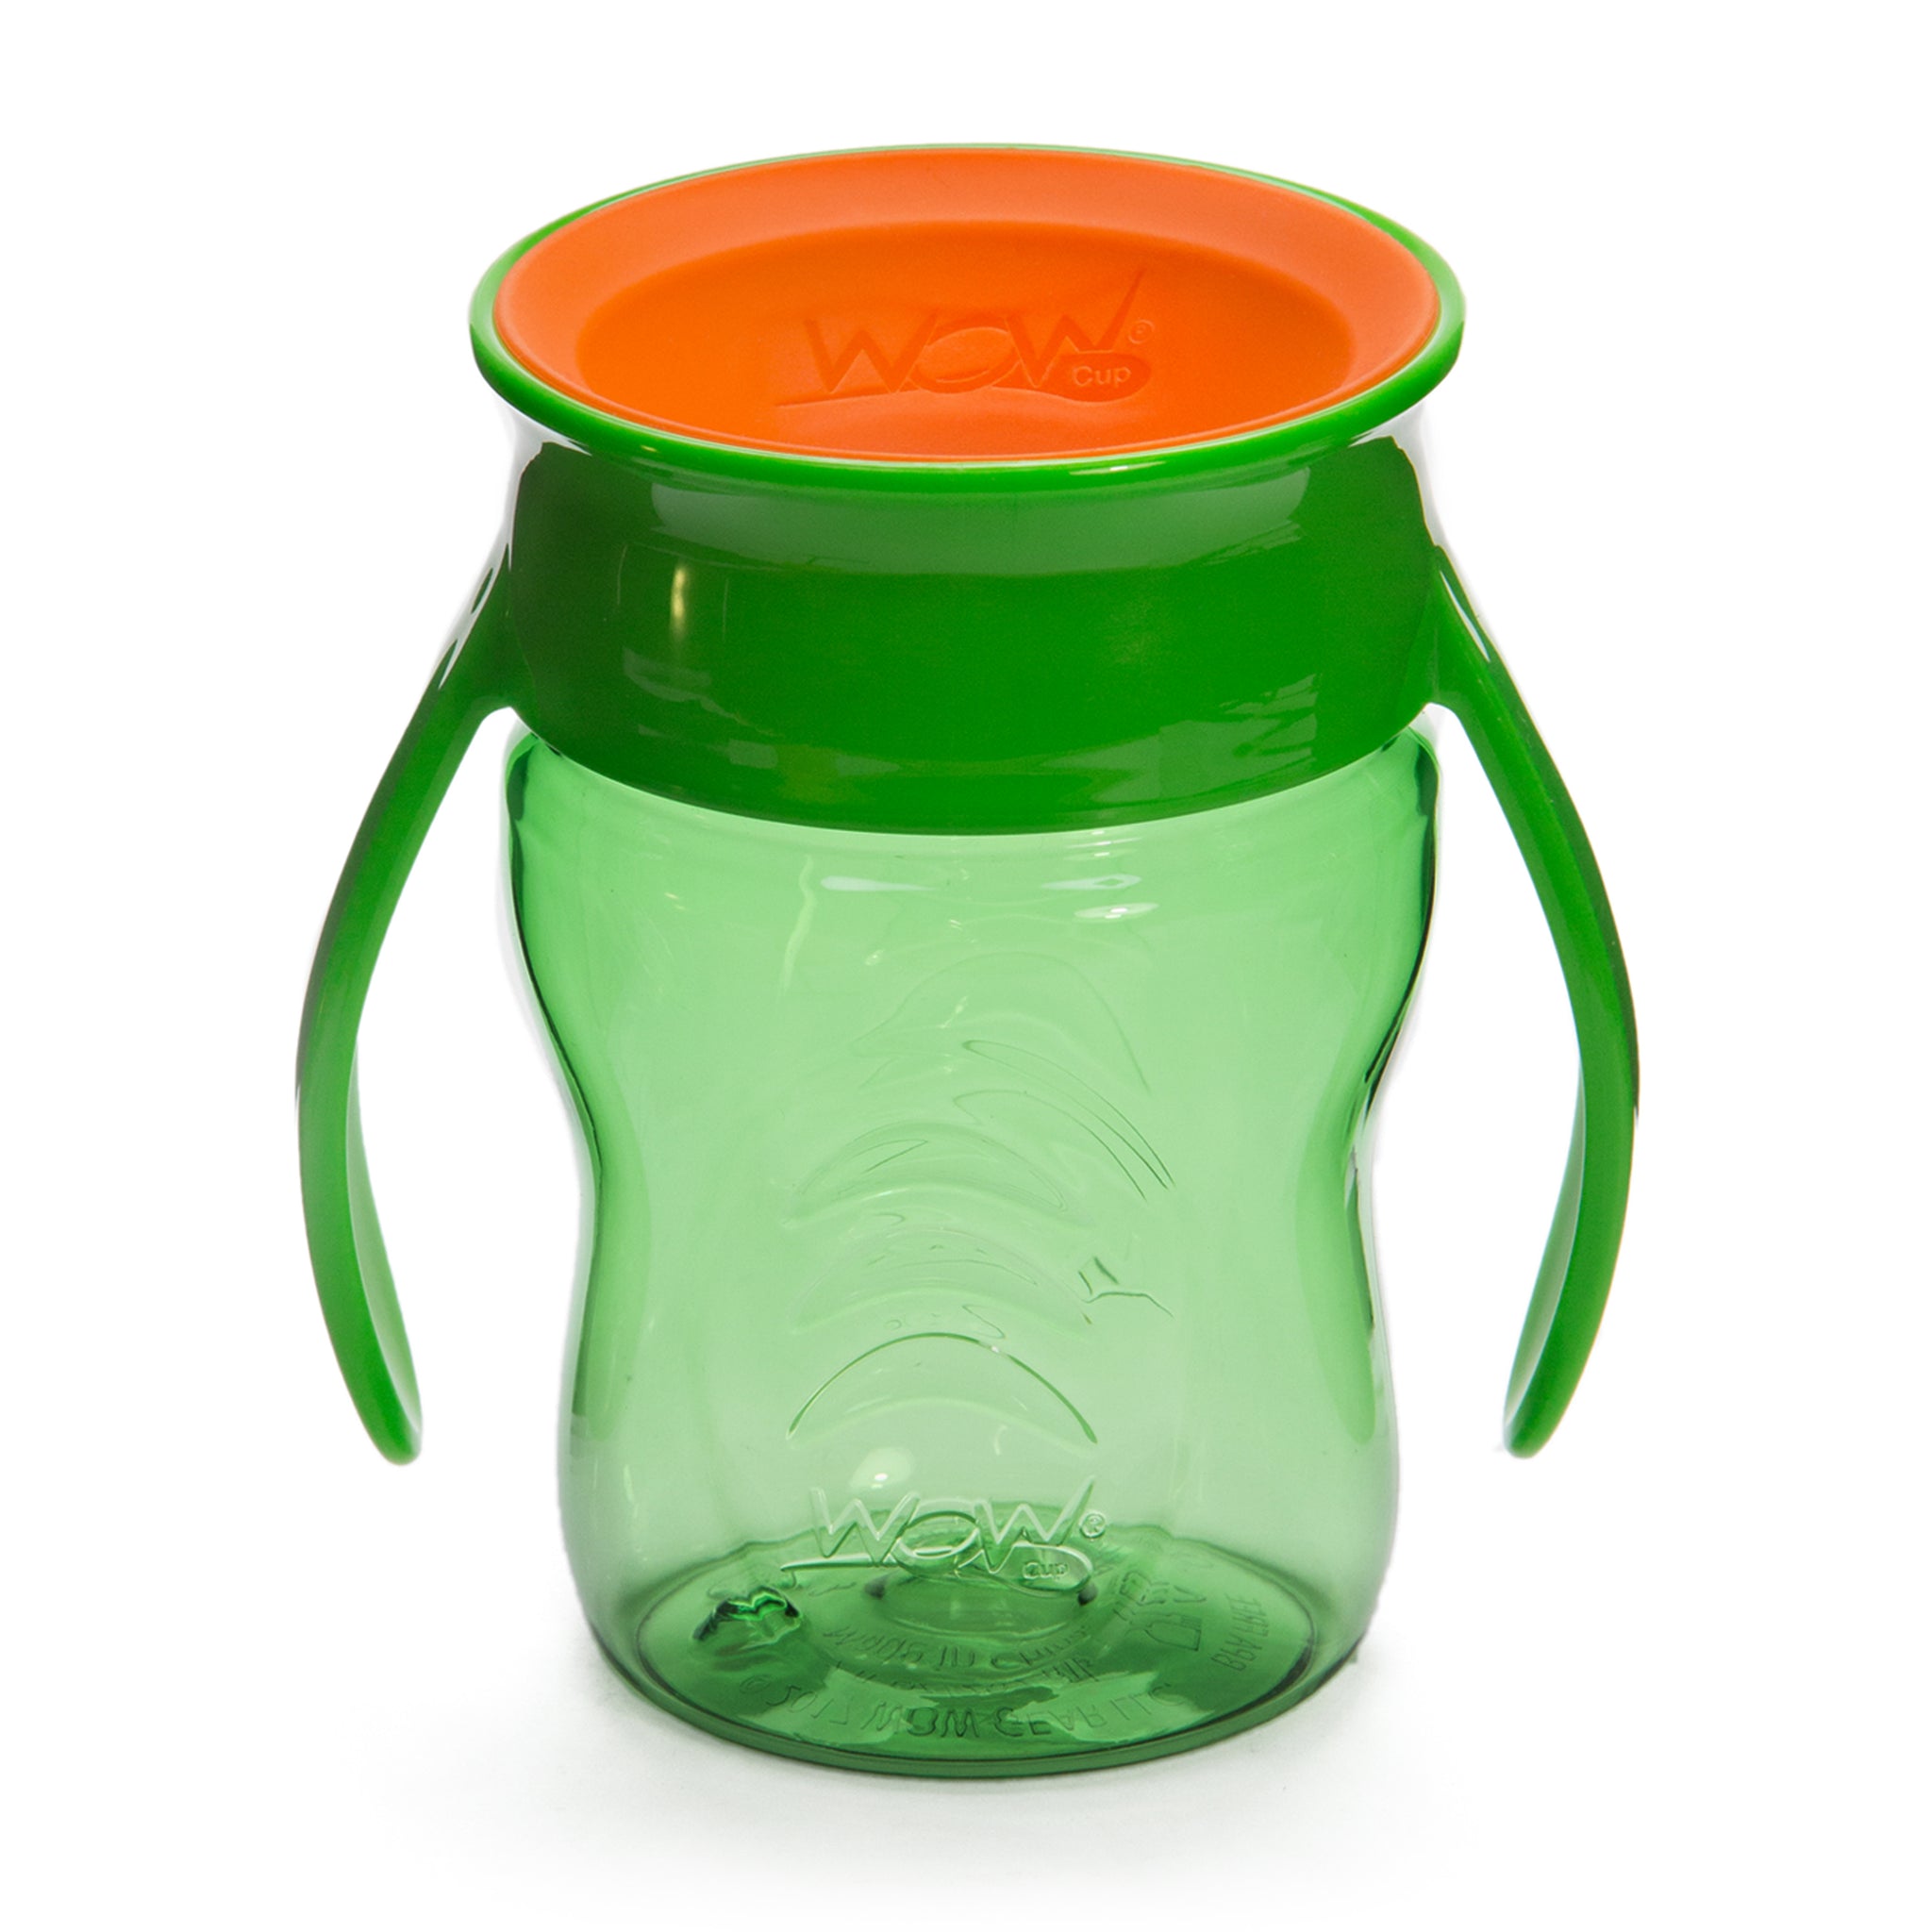 As seen on TV: Wow Cup spill free drinking cup review - The Gadgeteer